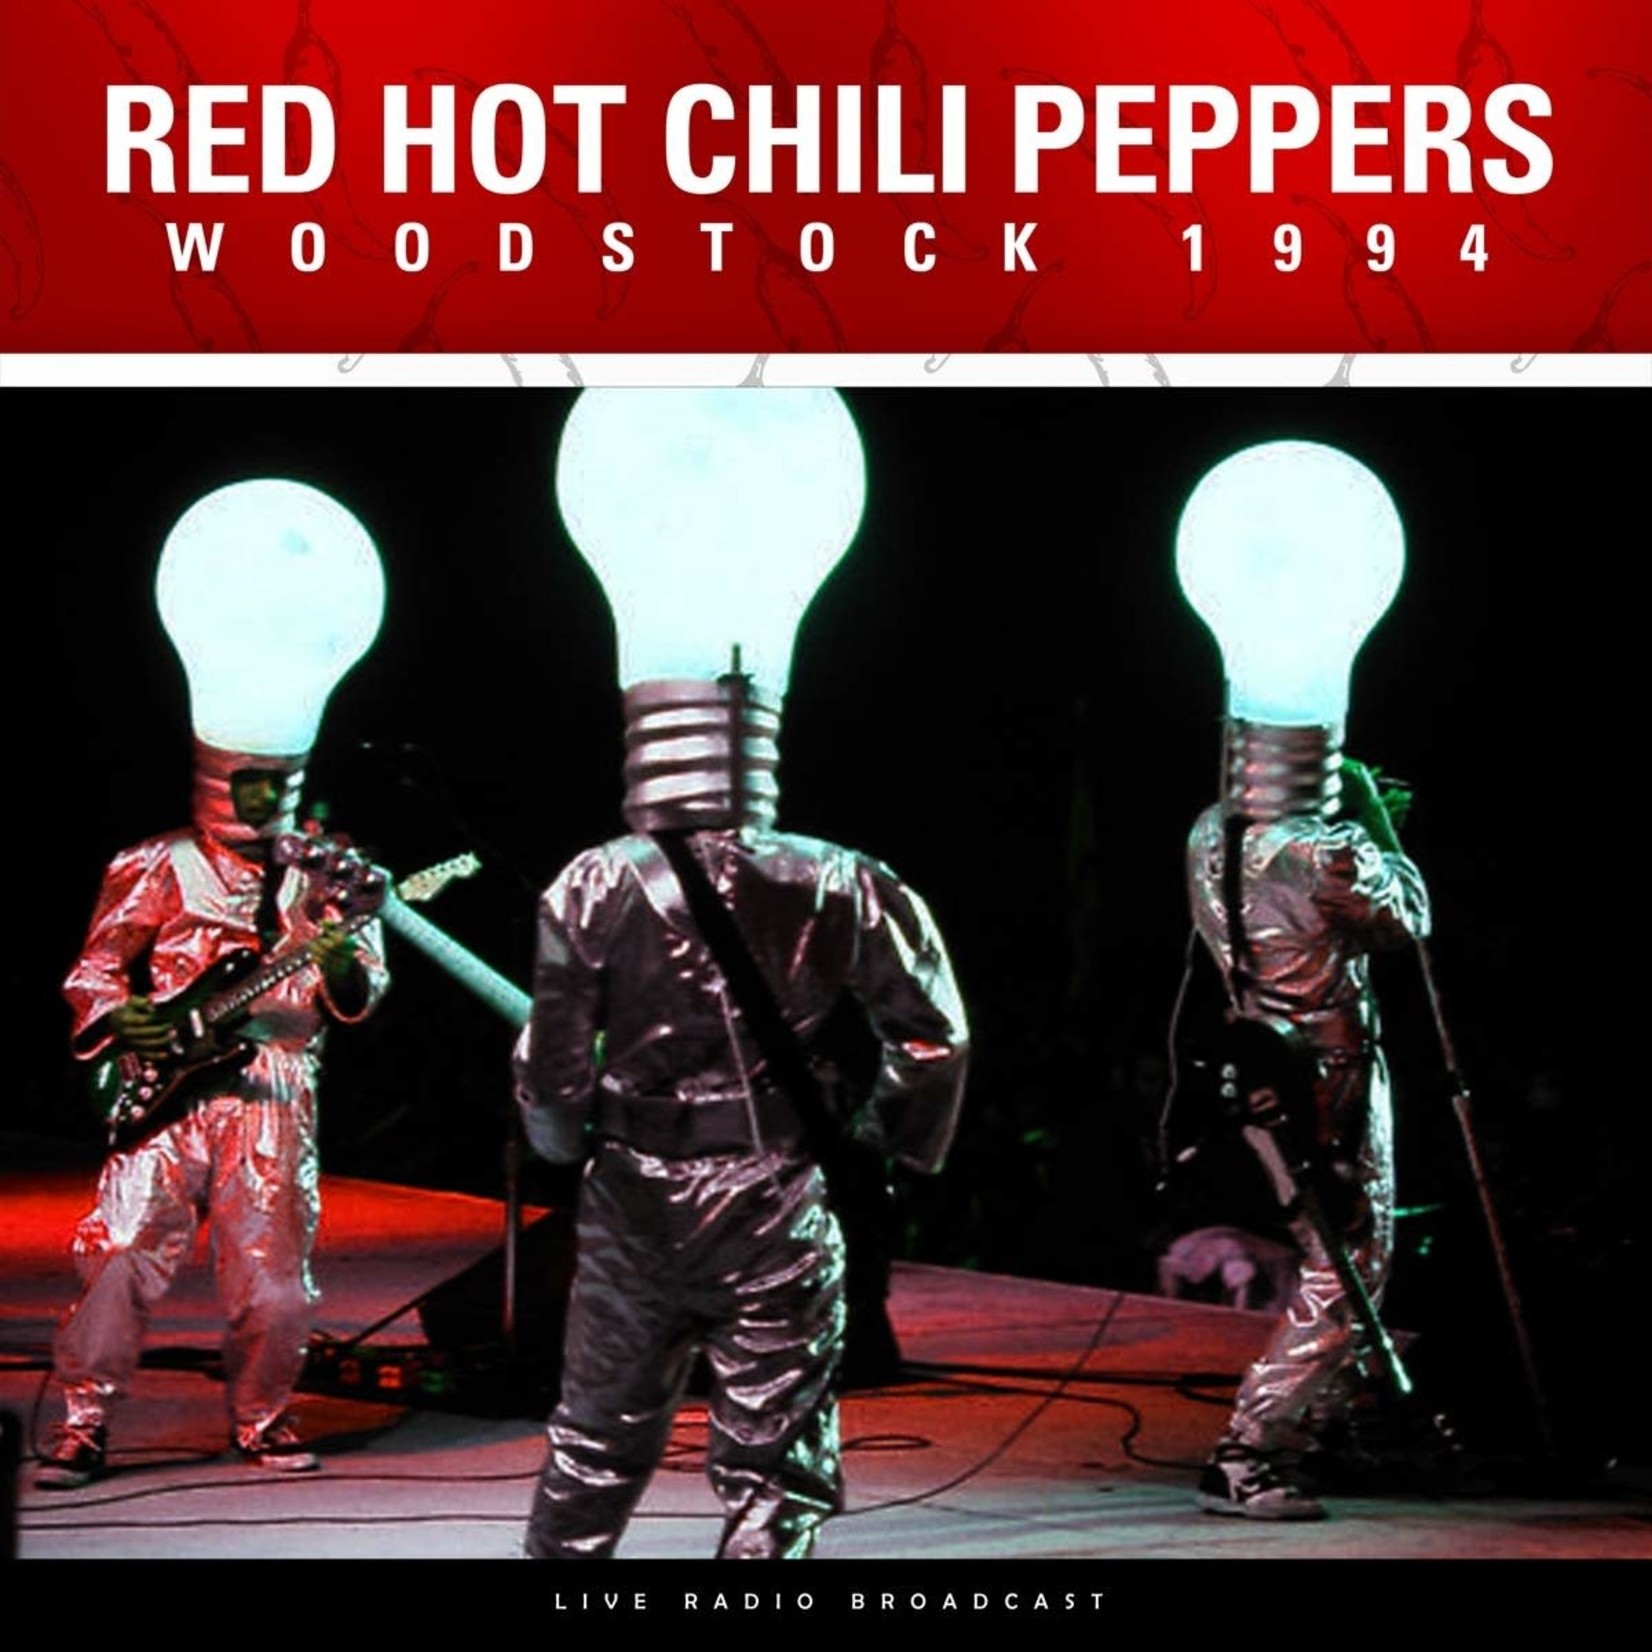 [New] Red Hot Chili Peppers - Best Of Woodstock 1994